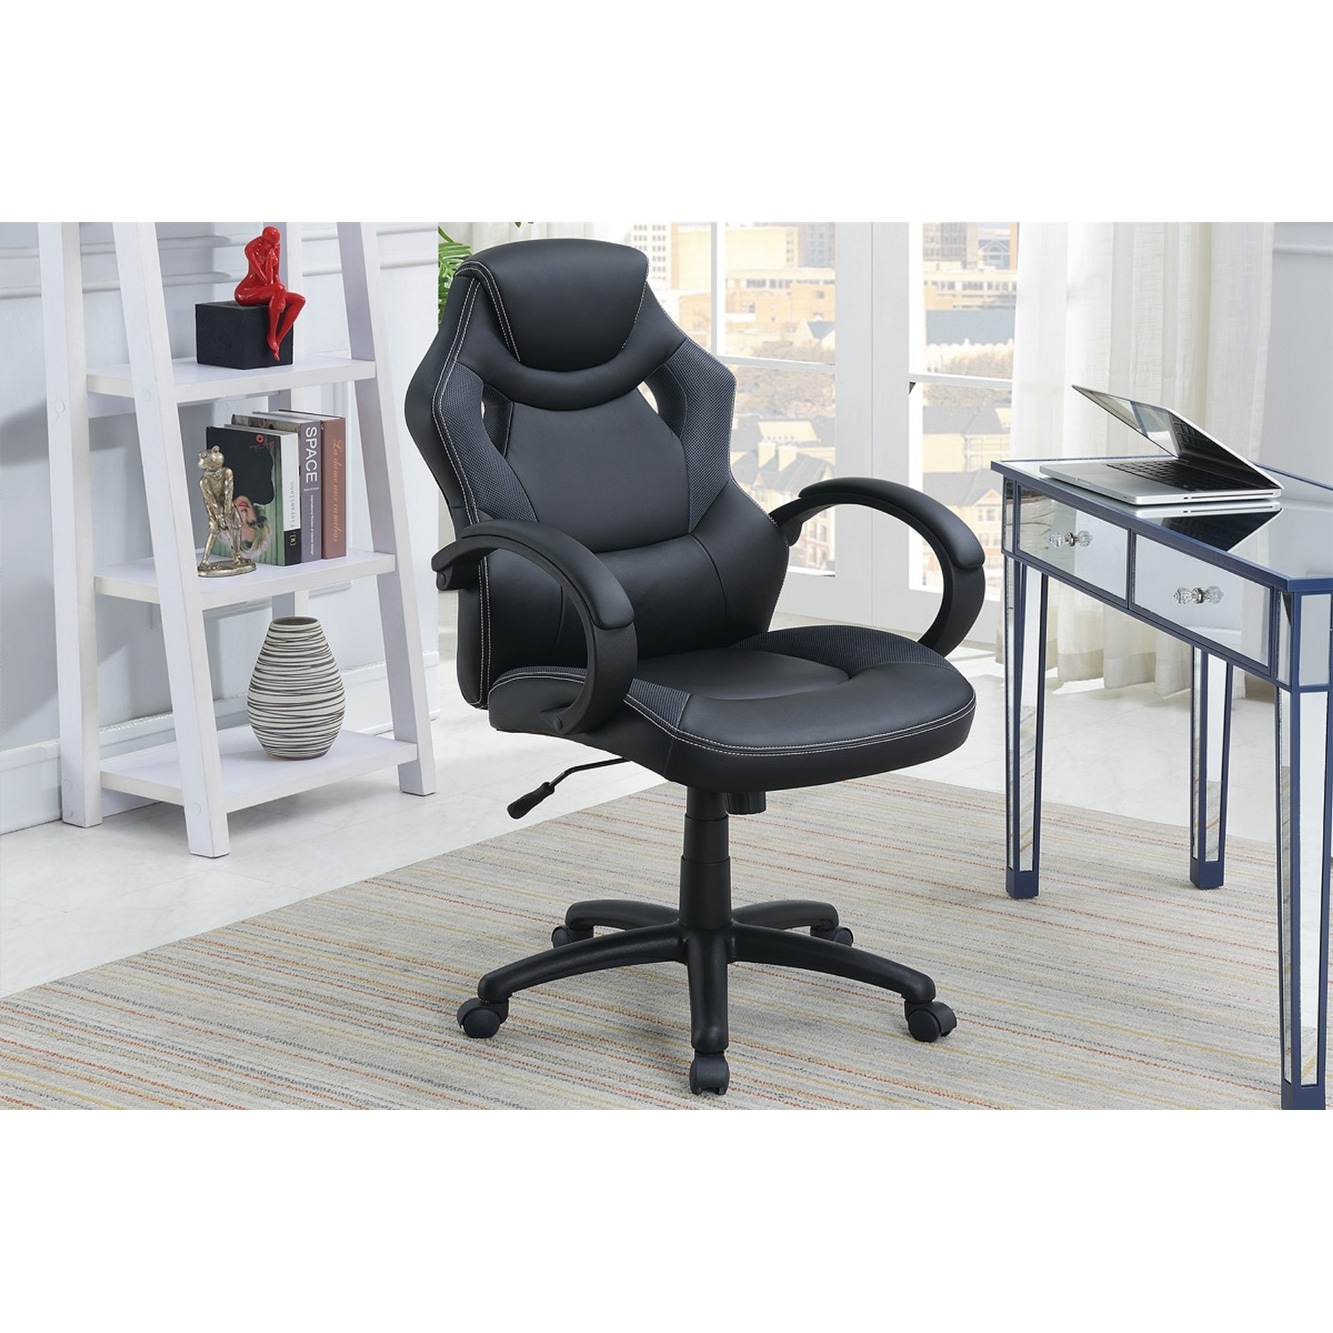 https://ak1.ostkcdn.com/images/products/is/images/direct/fbf5864914d524e8735746cb3308791795e3cfd0/Office-Chair-Upholstered-1pc.jpg